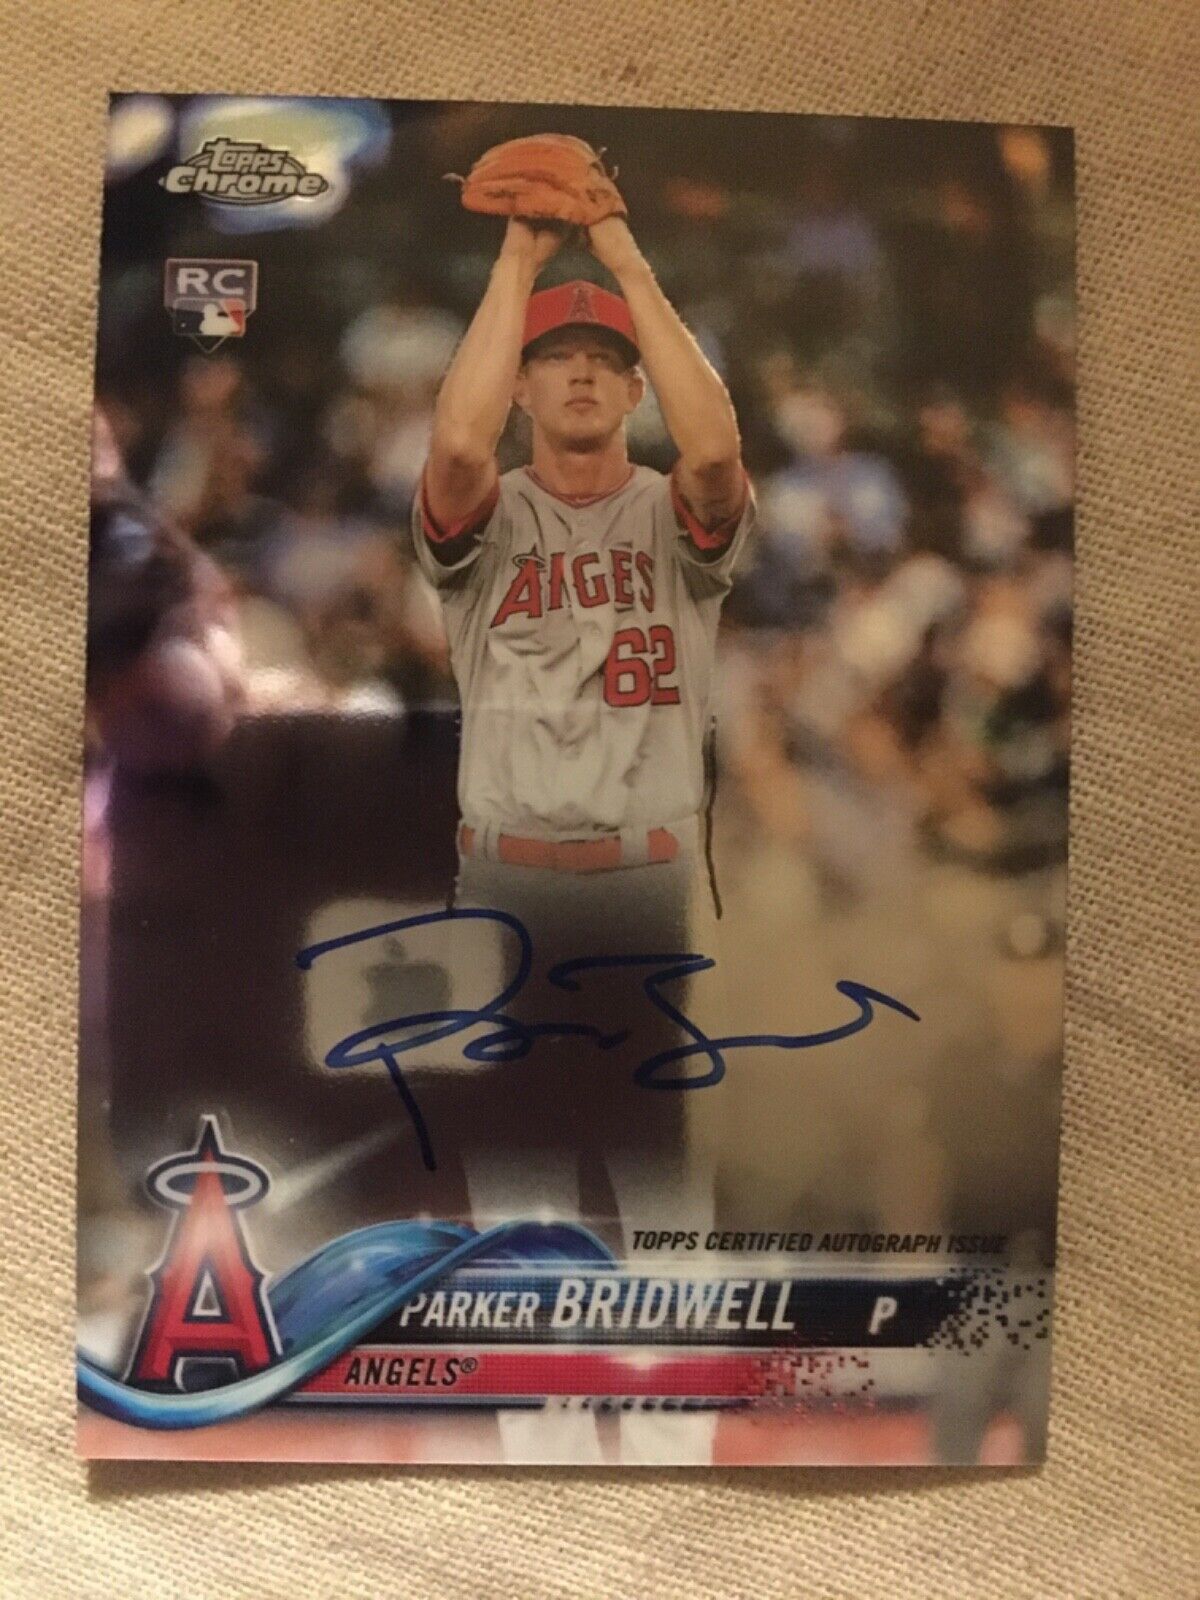 2018 Topps Chrome Autograph Angels Parker Bridwell Rookie Card #RA-PBR. rookie card picture